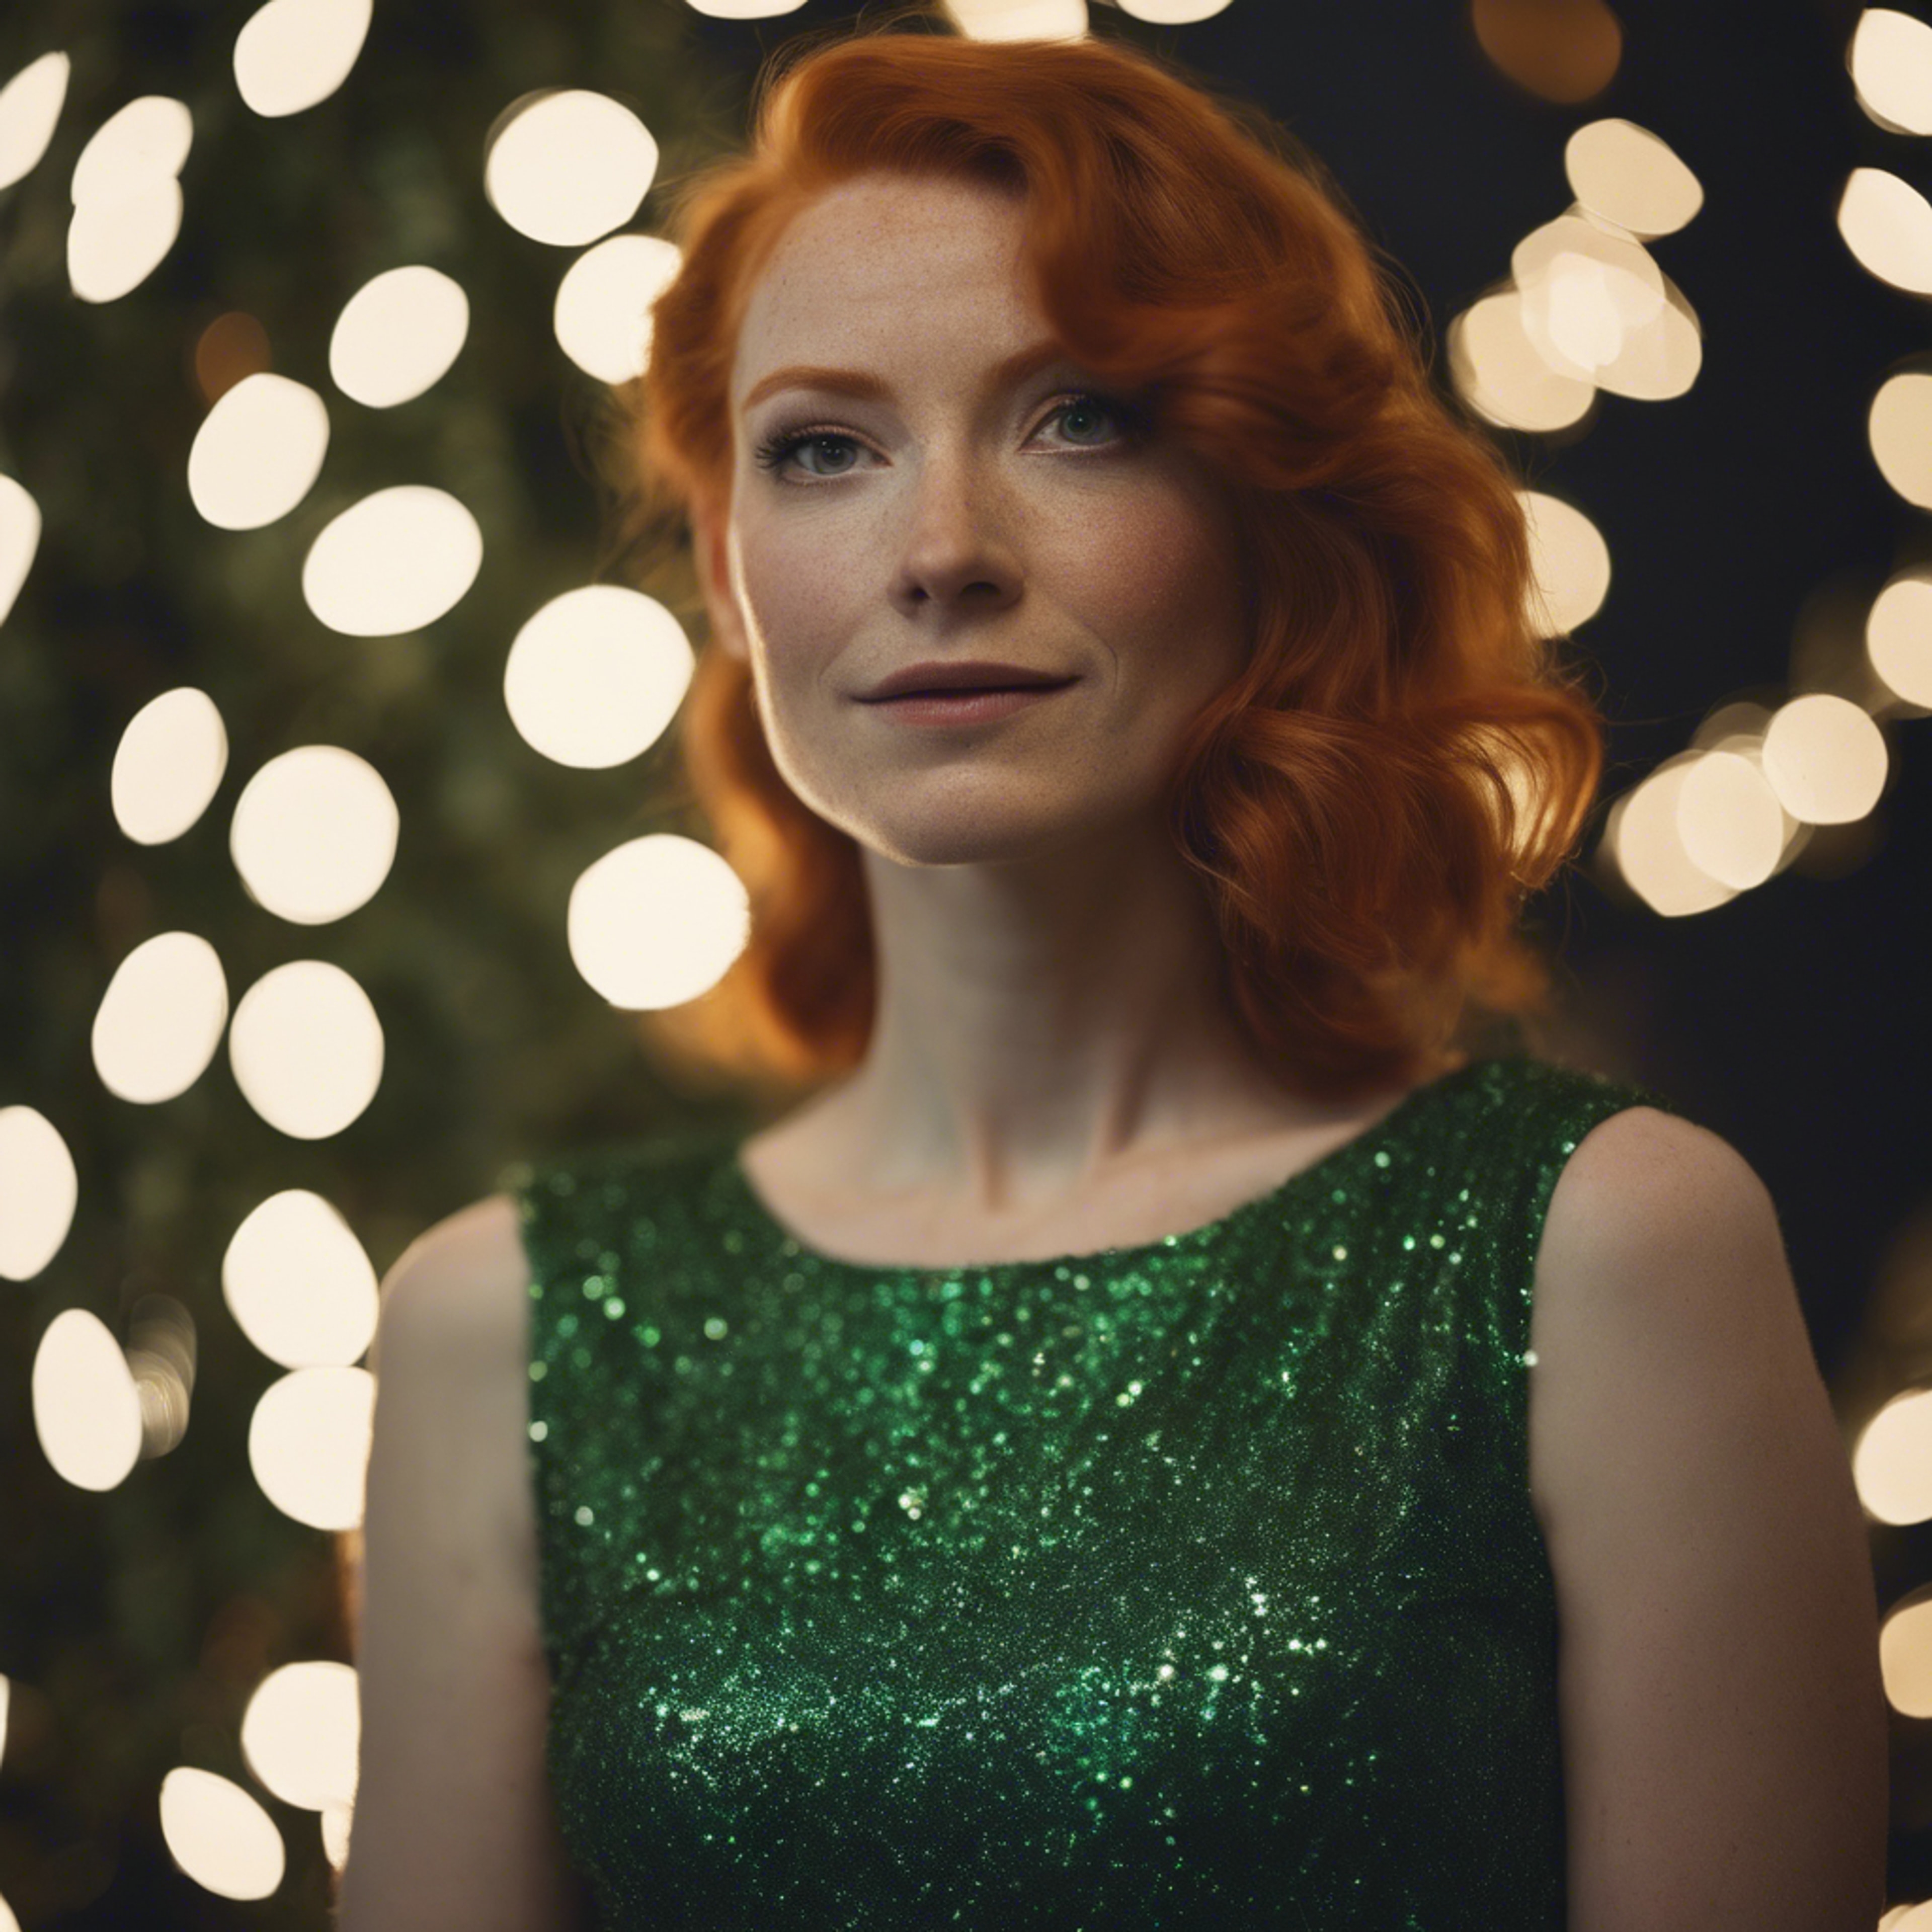 A redheaded woman wearing a sparkly green dress at a Christmas party Tapeet[a7aea6b7222f4d2facc9]